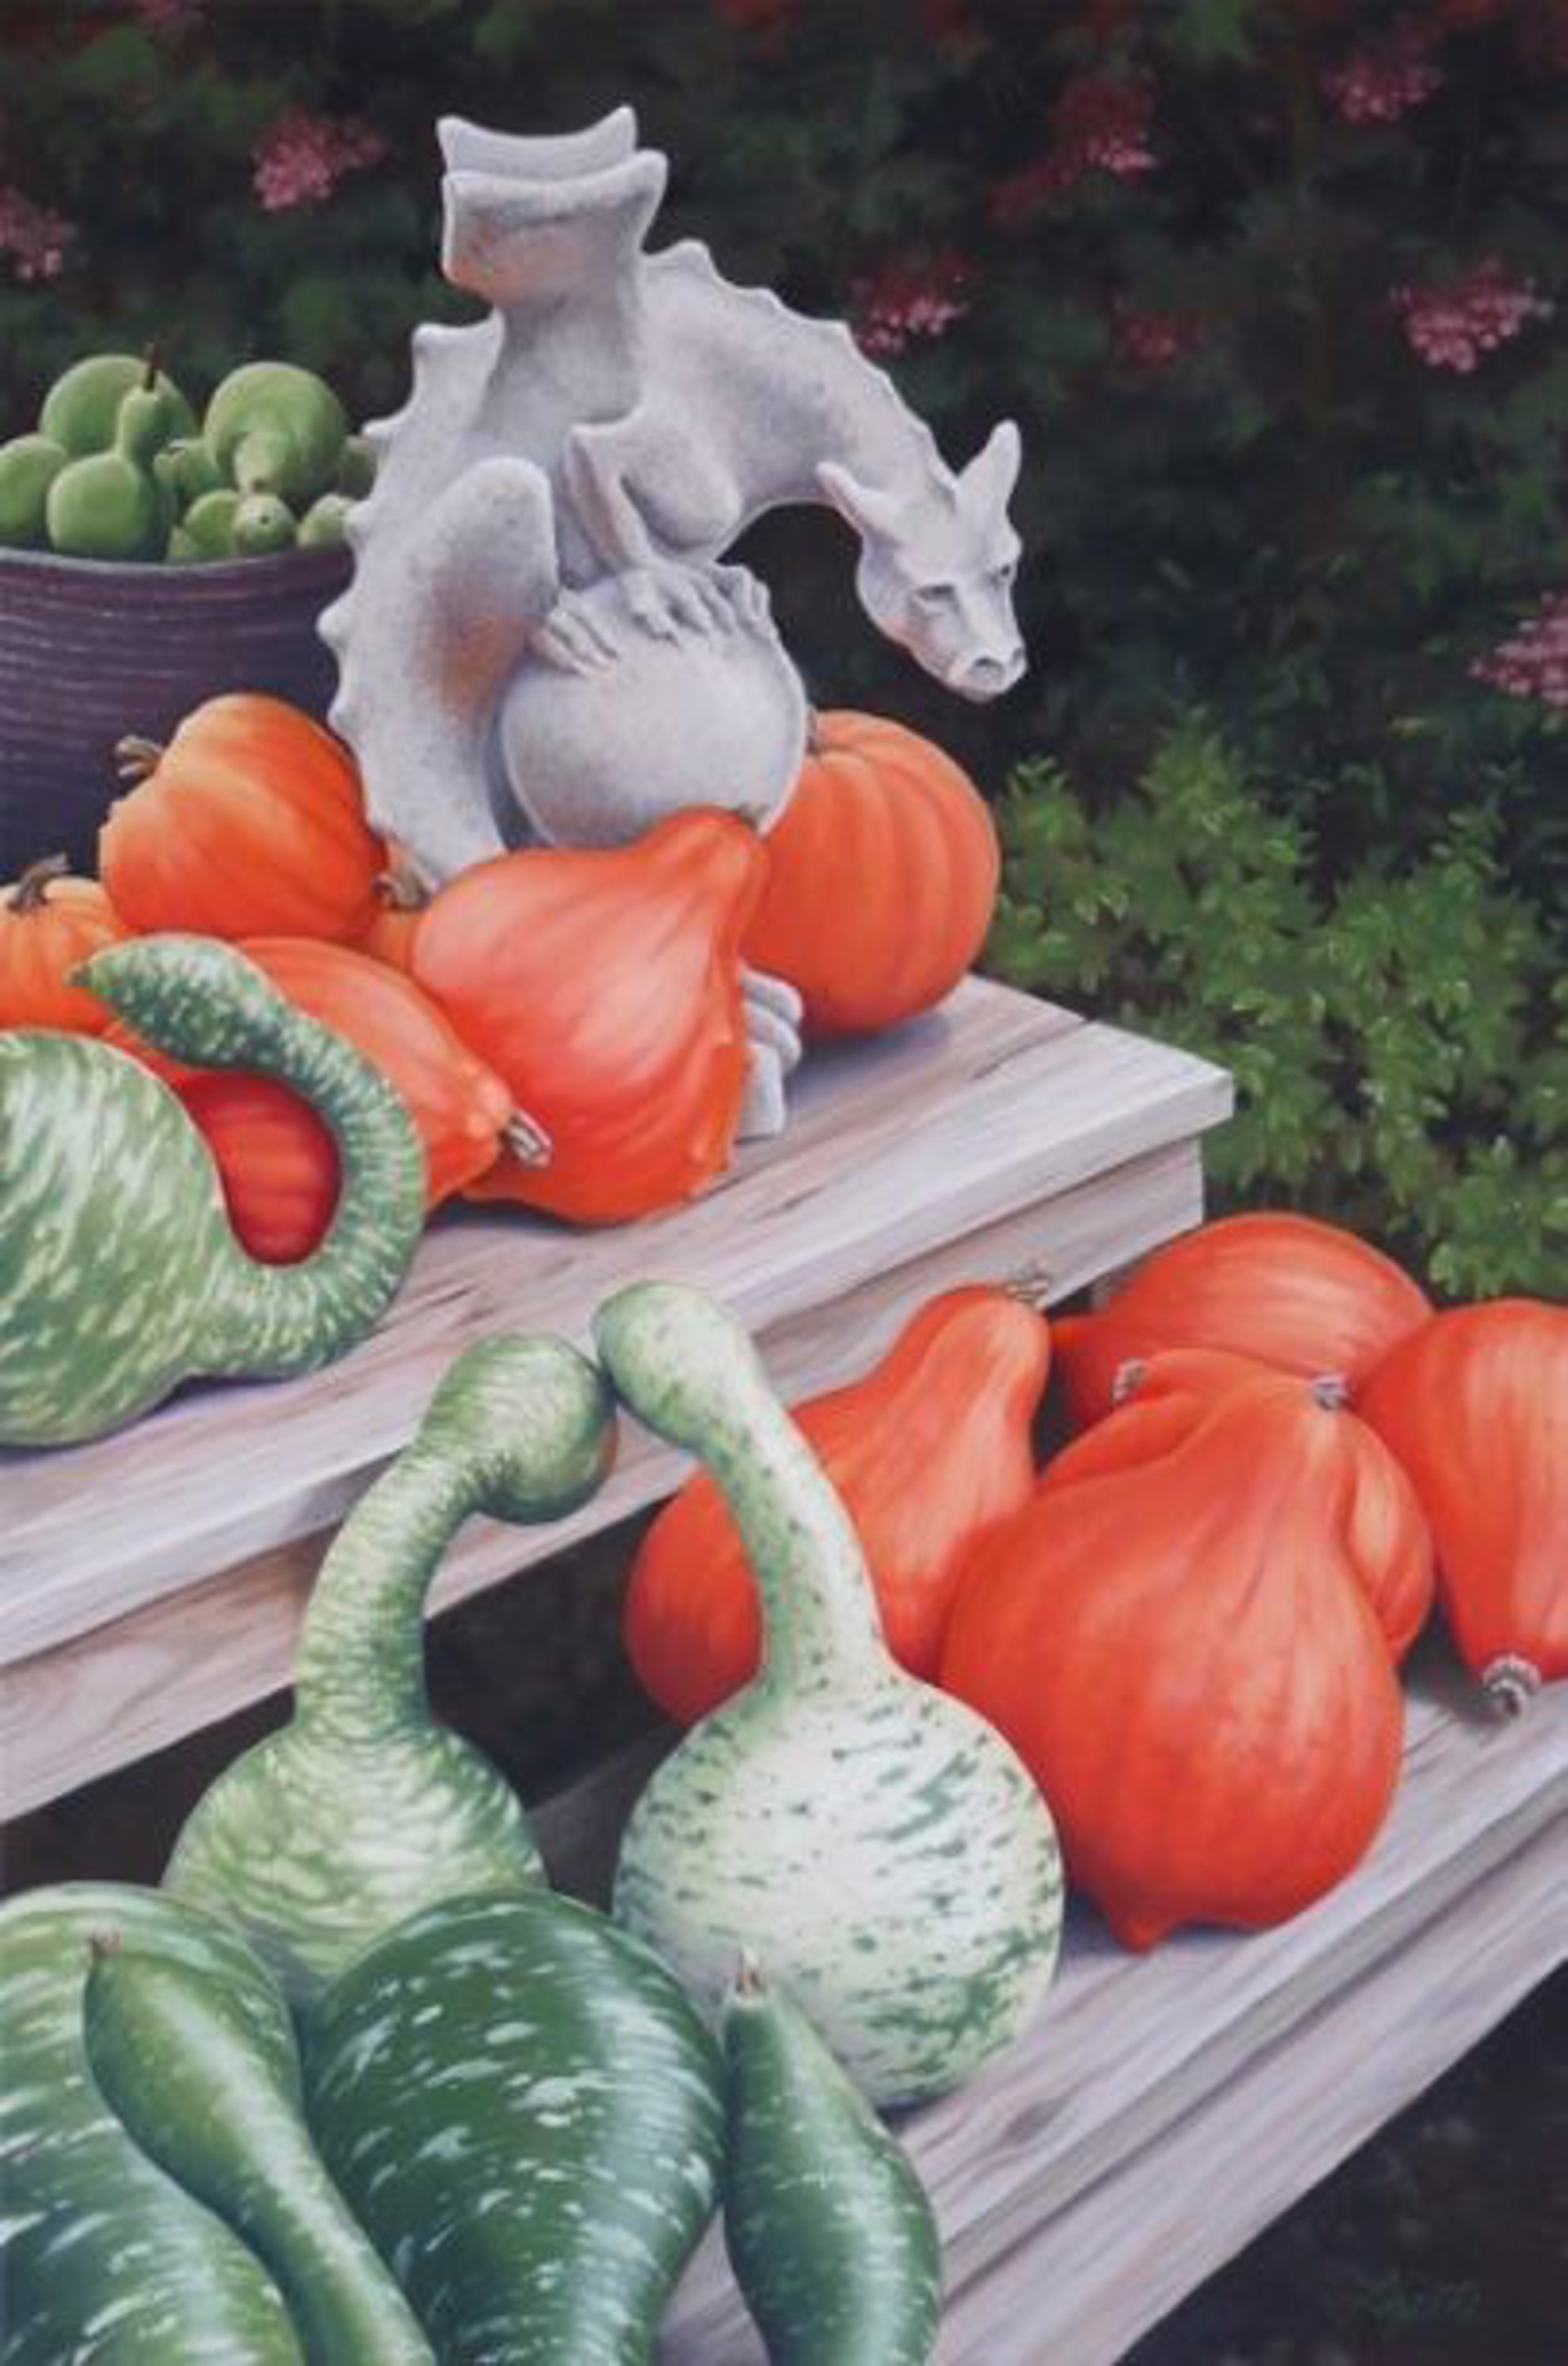 Dragons and Gourds by Liz Phillips